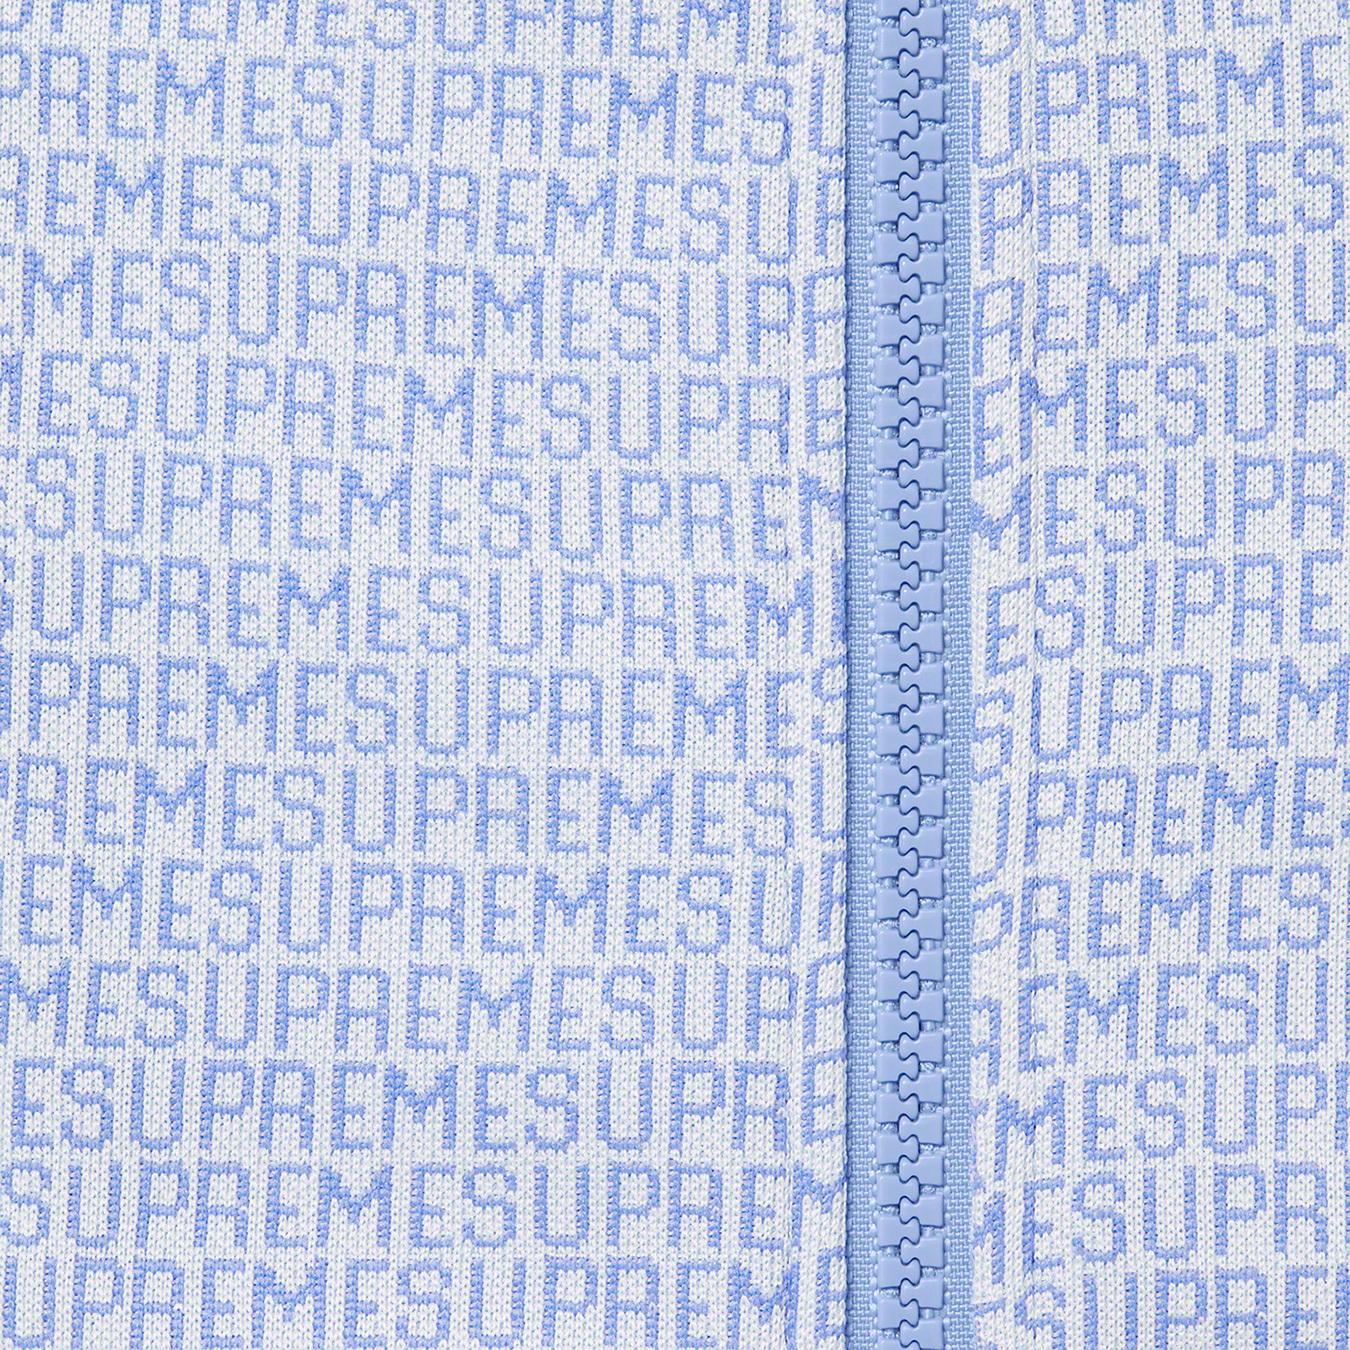 Repeat Track Jacket | Supreme 22ss